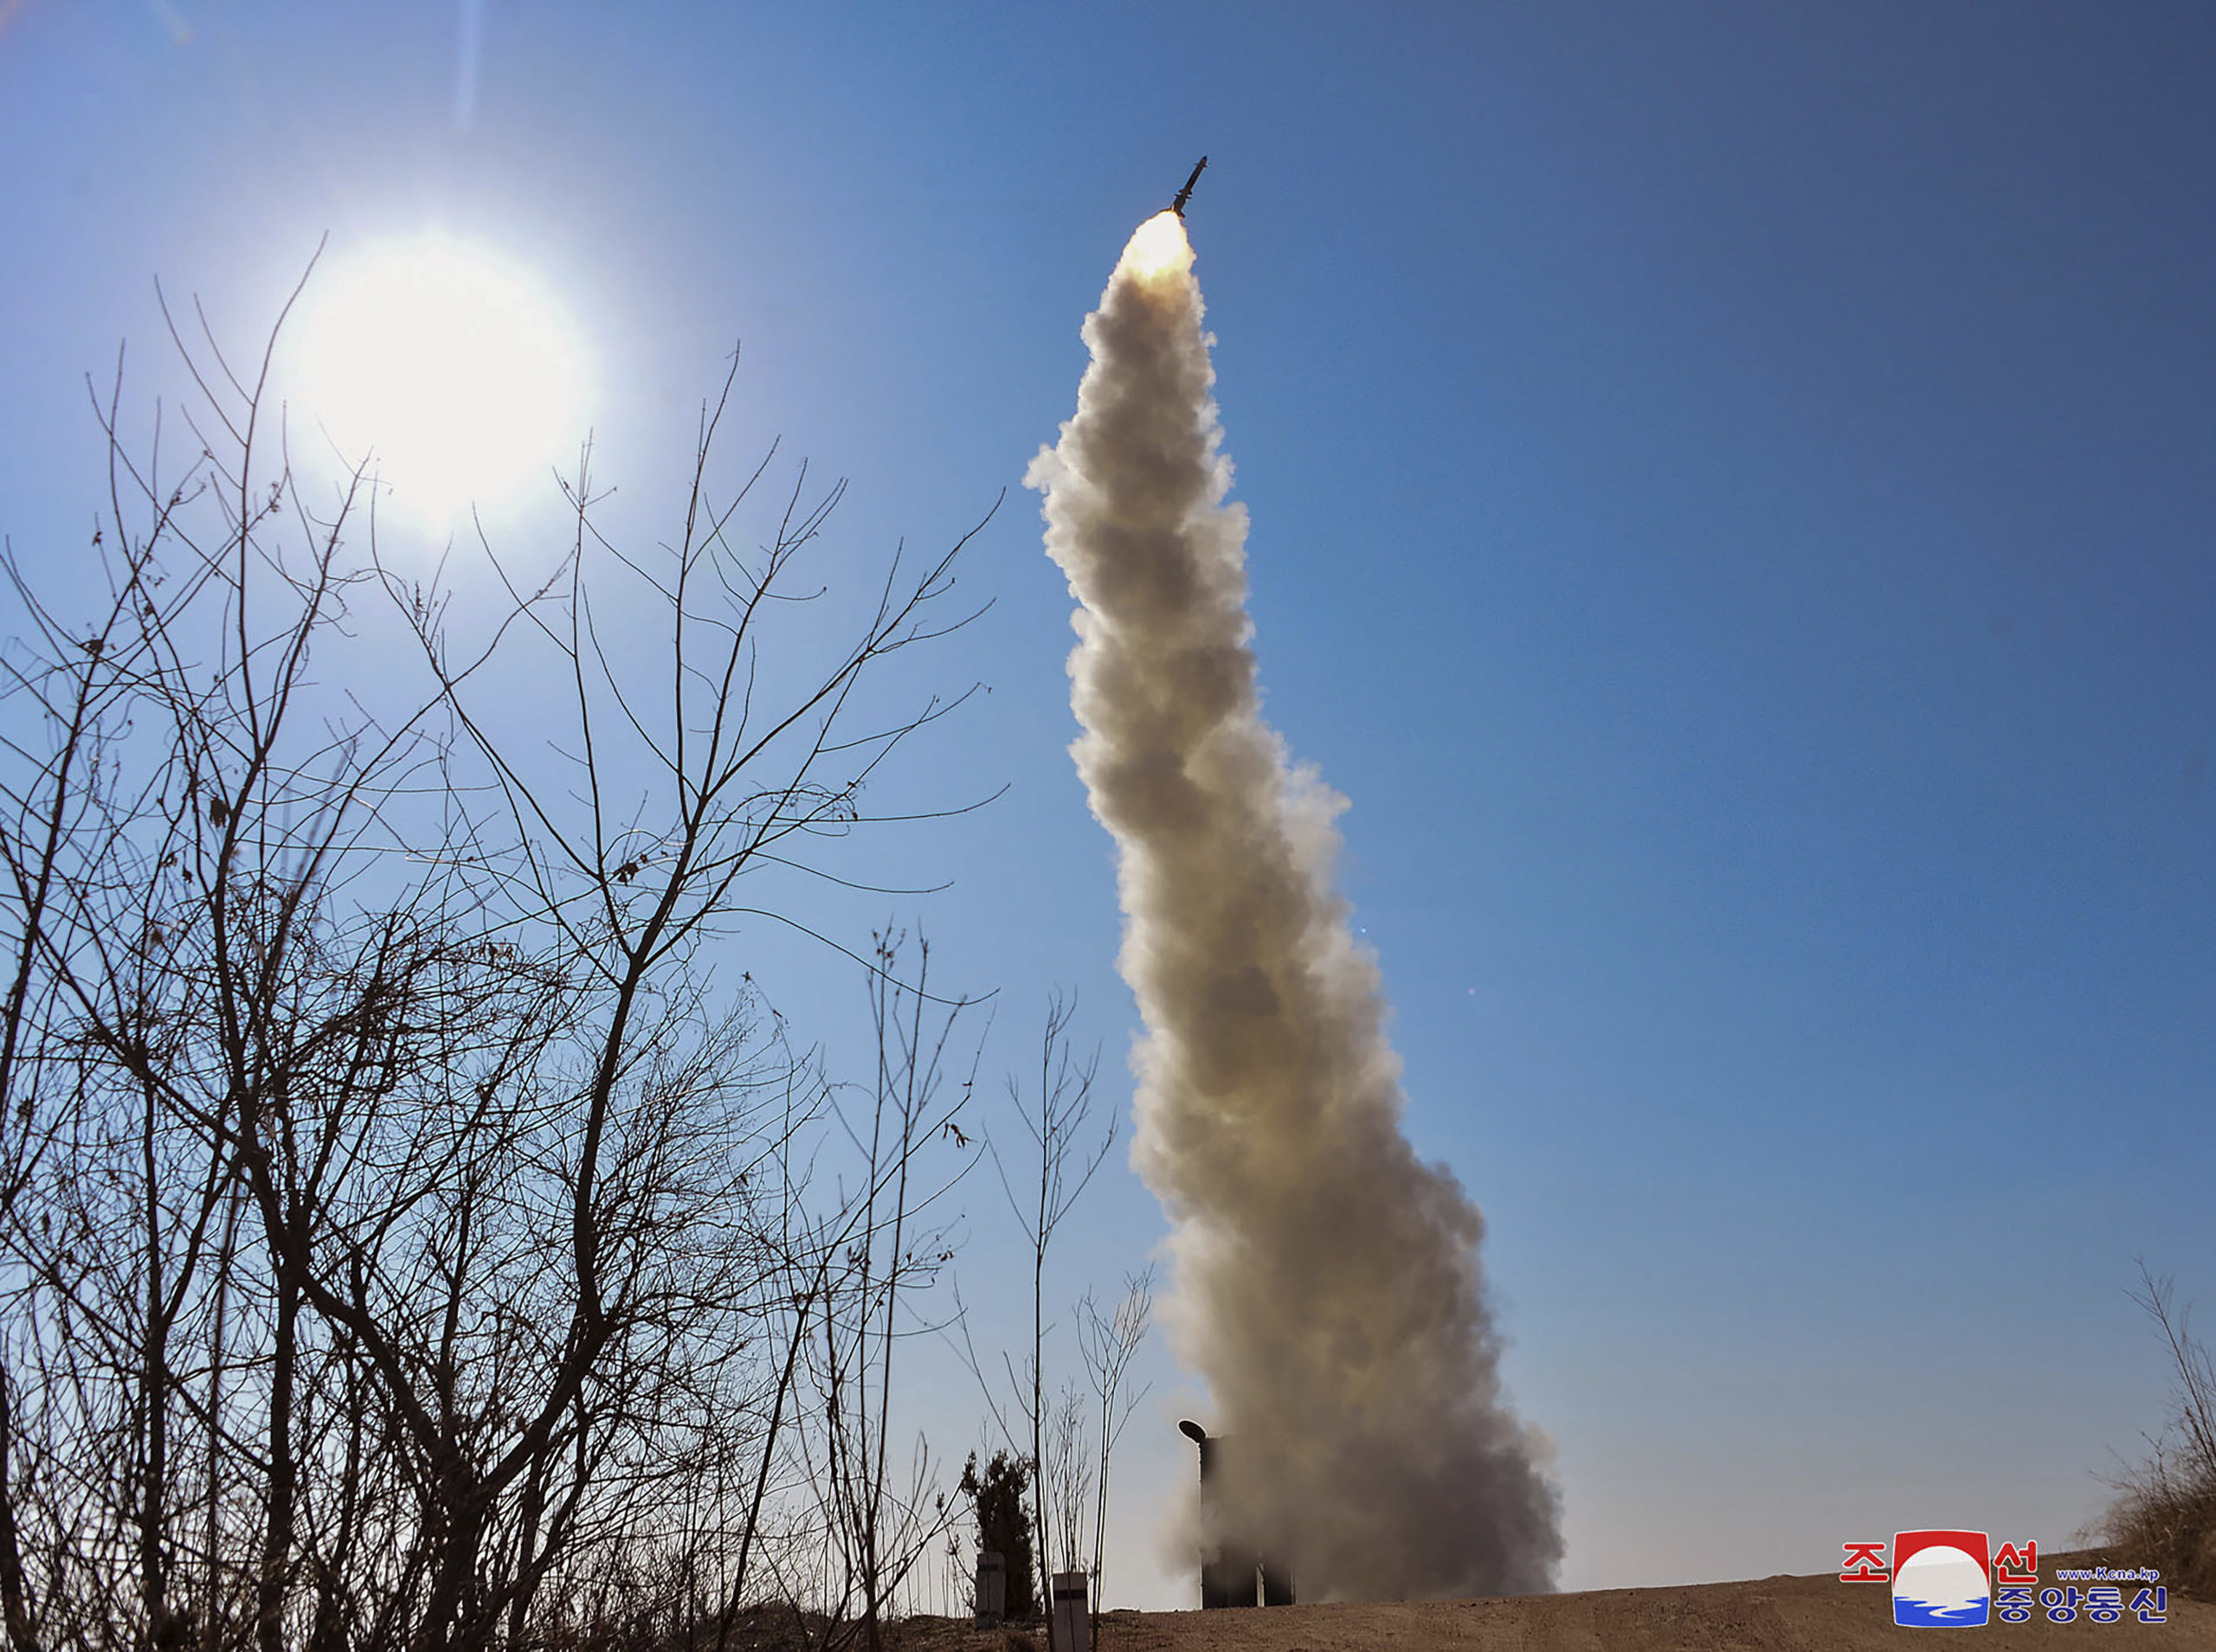 This photo provided by the North Korean government shows what it says is a test firing of a new anti-air missile in North Korea on Friday. The content of this image as provided could not be independently verified.